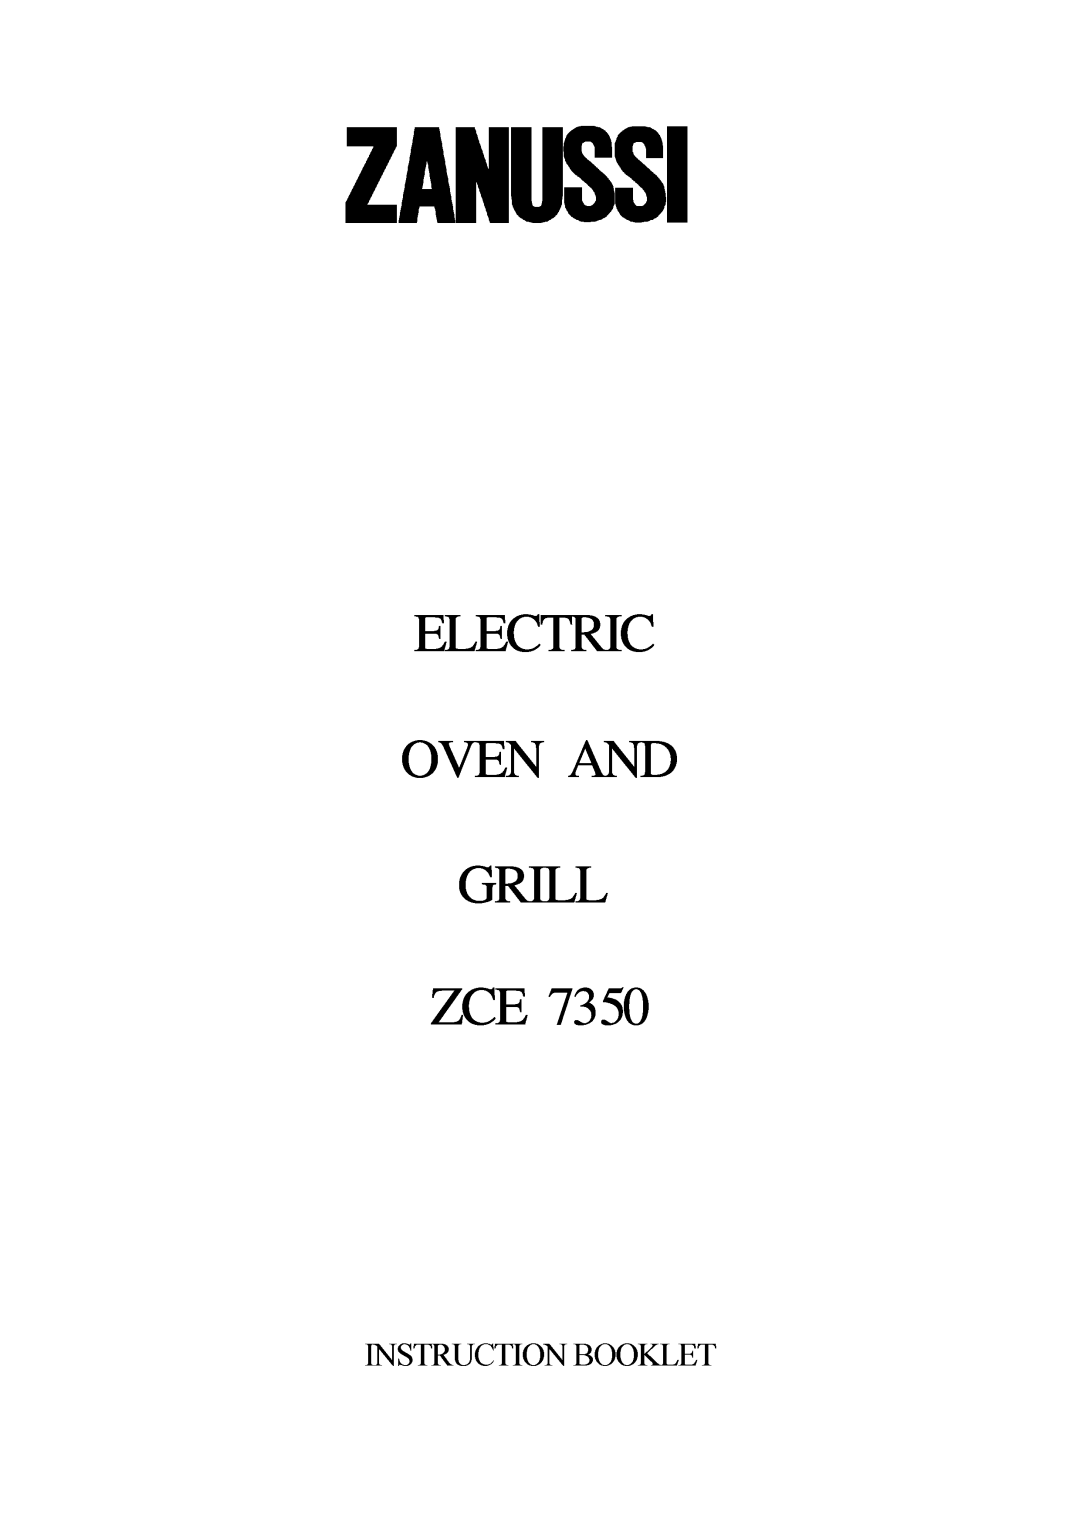 Zanussi manual INSTRUCTIONZCE 7350BOOKLET, Electric Oven And Grill 